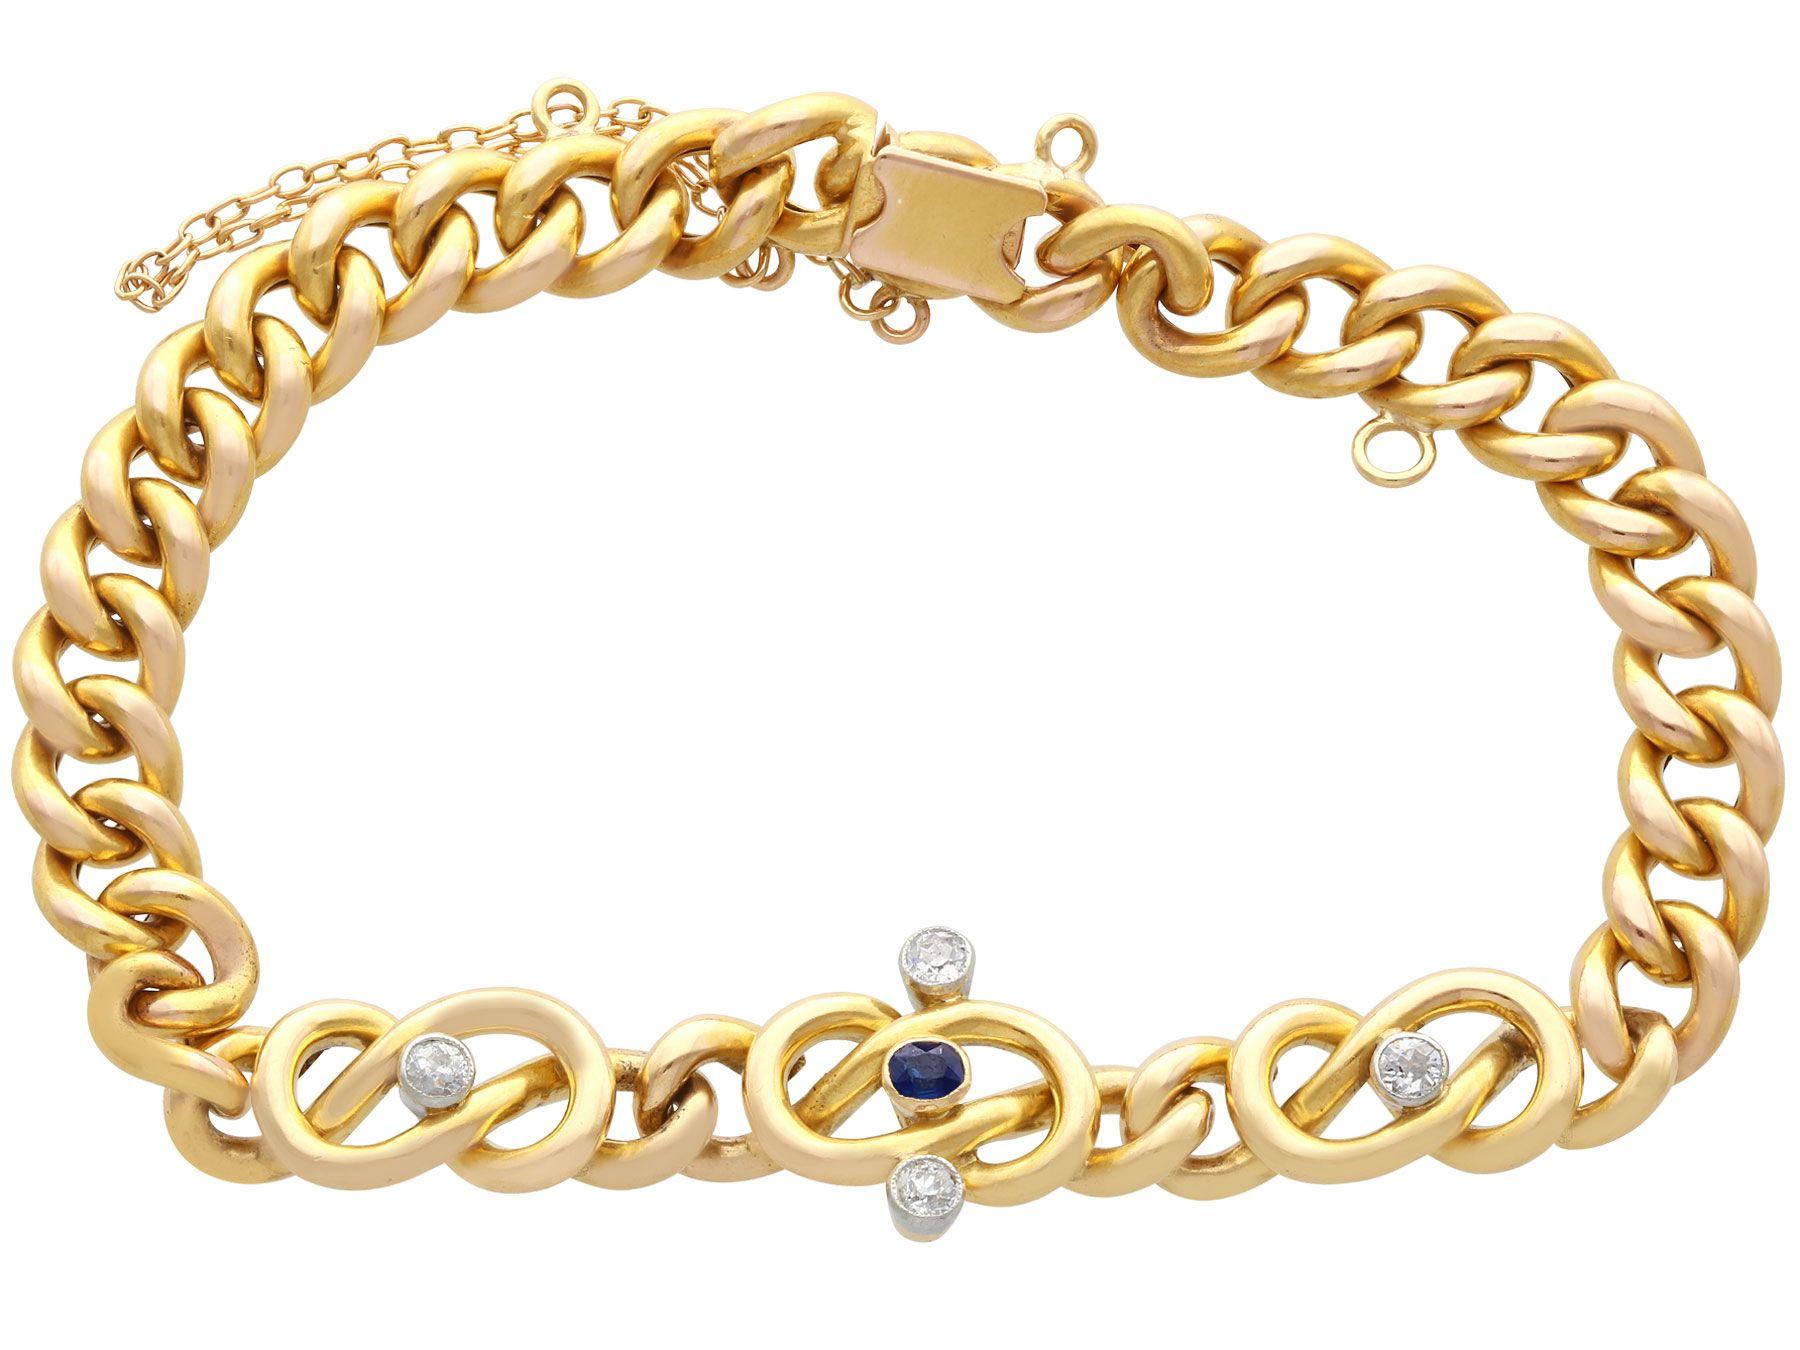 A fine 0.08 carat sapphire and 0.30 carat diamond, 18 karat yellow gold and 18 karat white gold curb bracelet; part of our diverse jewelry collections.

This fine and impressive curb bracelet has been crafted in 18k yellow gold with 18k white gold